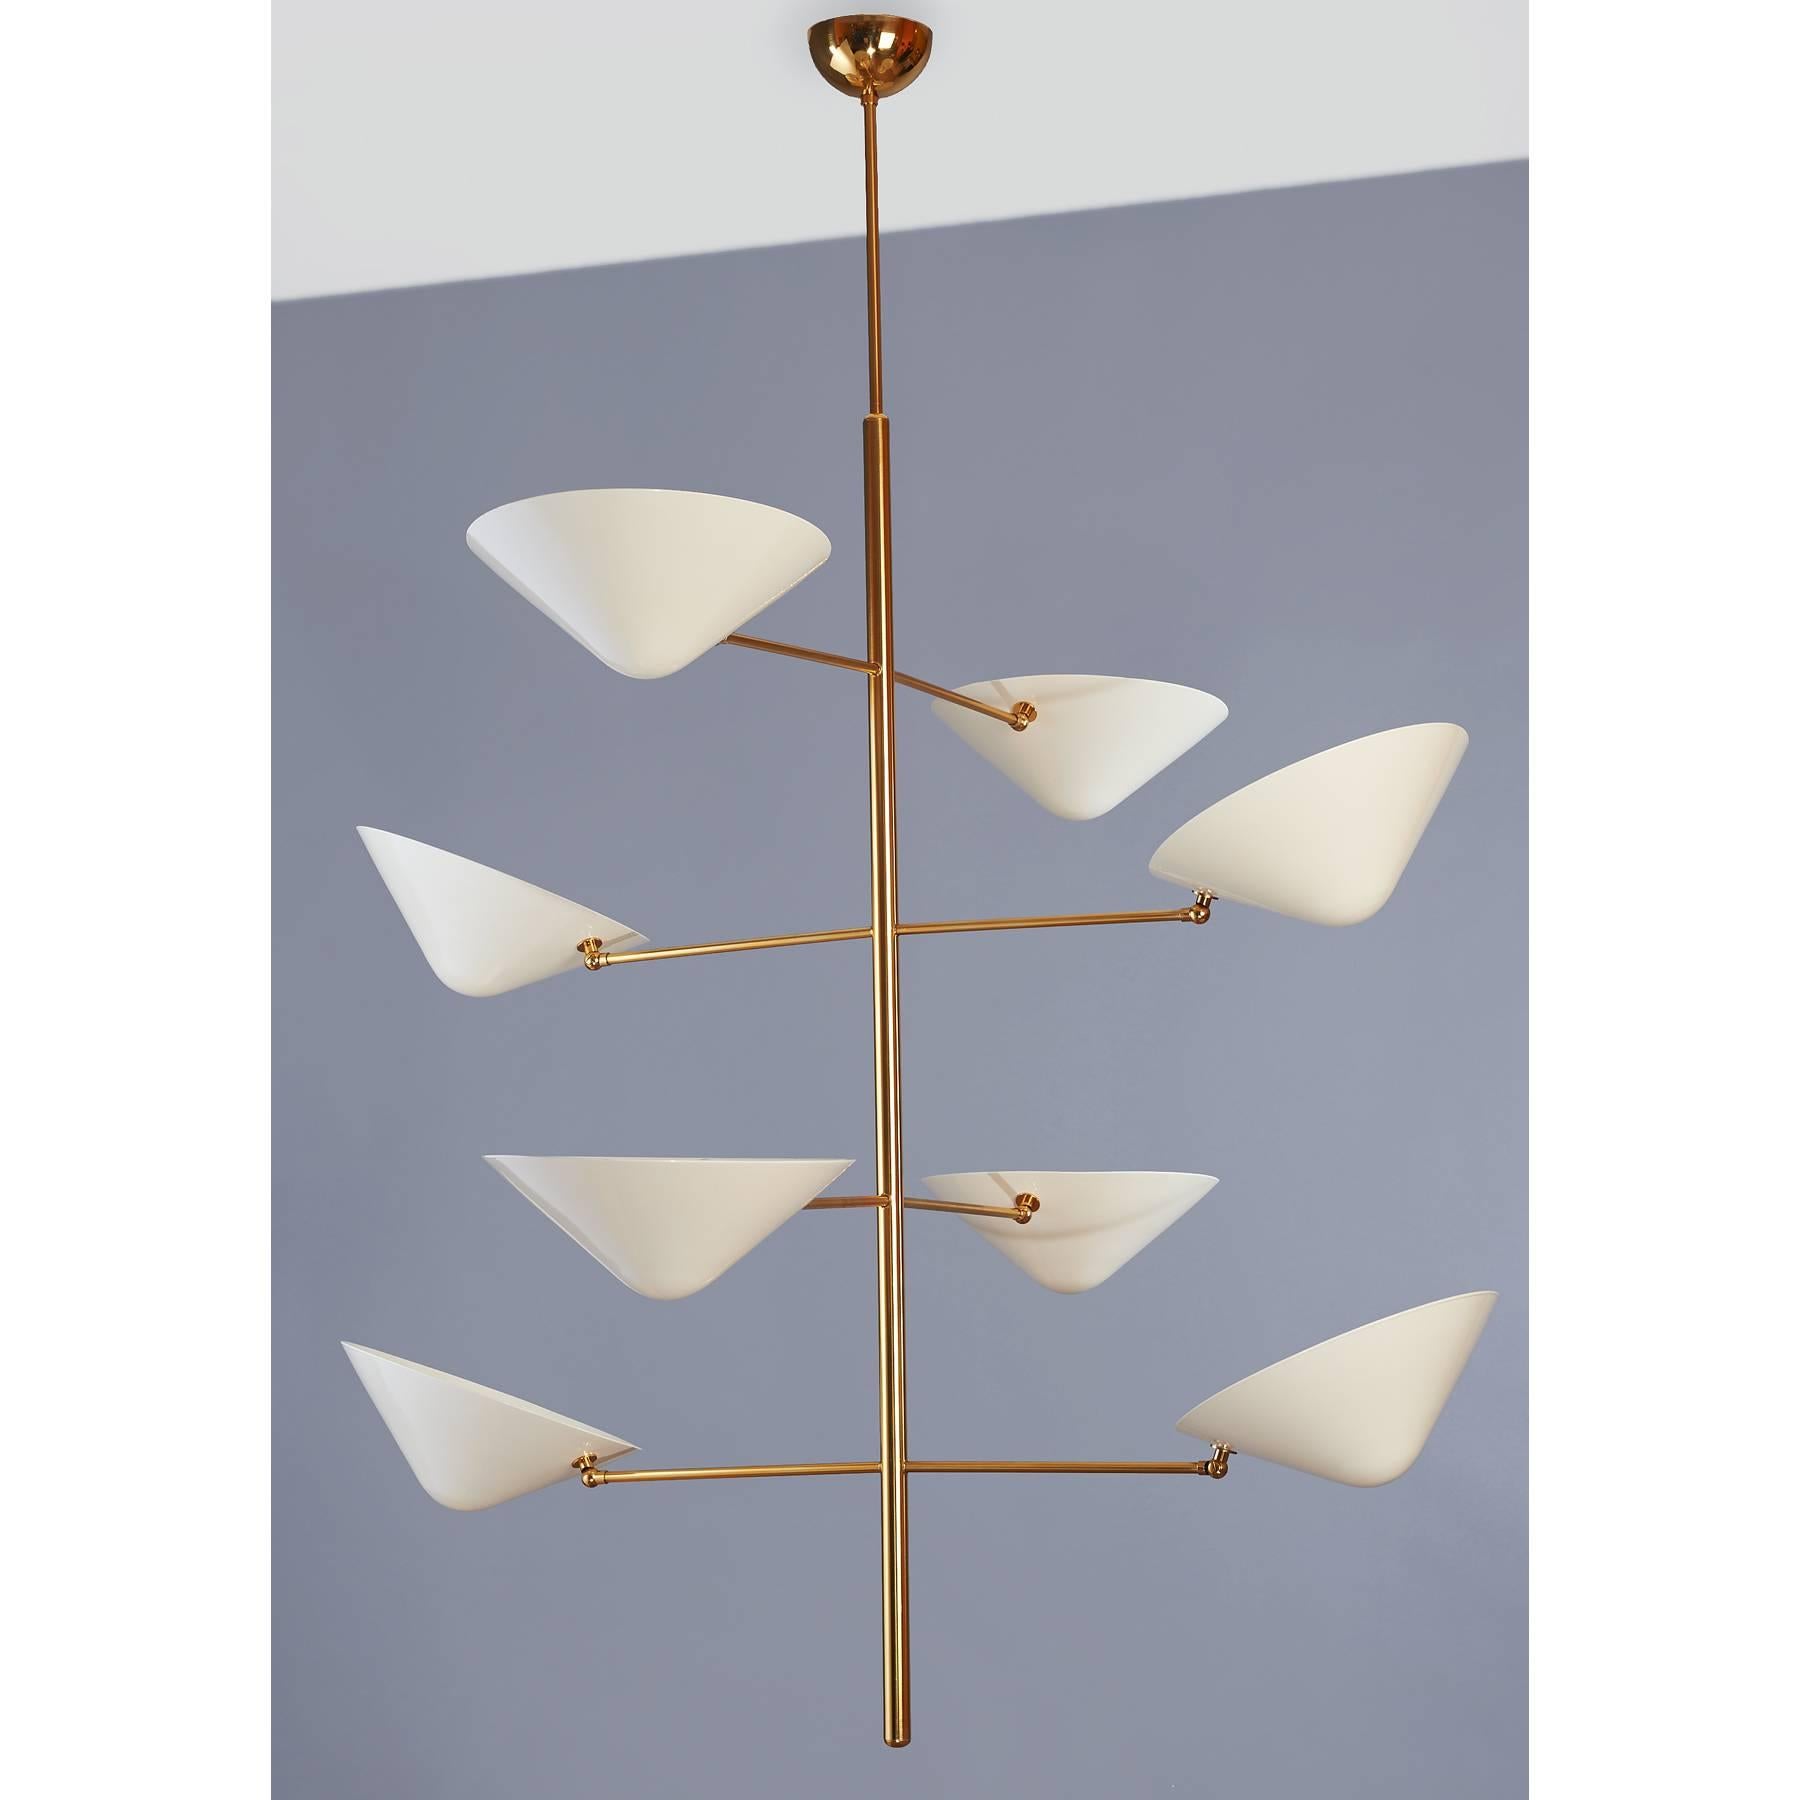 Italy, contemporary
An impressive eight branch polished brass pendant light fixture with adjustable cream enameled metal shades
Dimensions: 49 D x 63 H  

